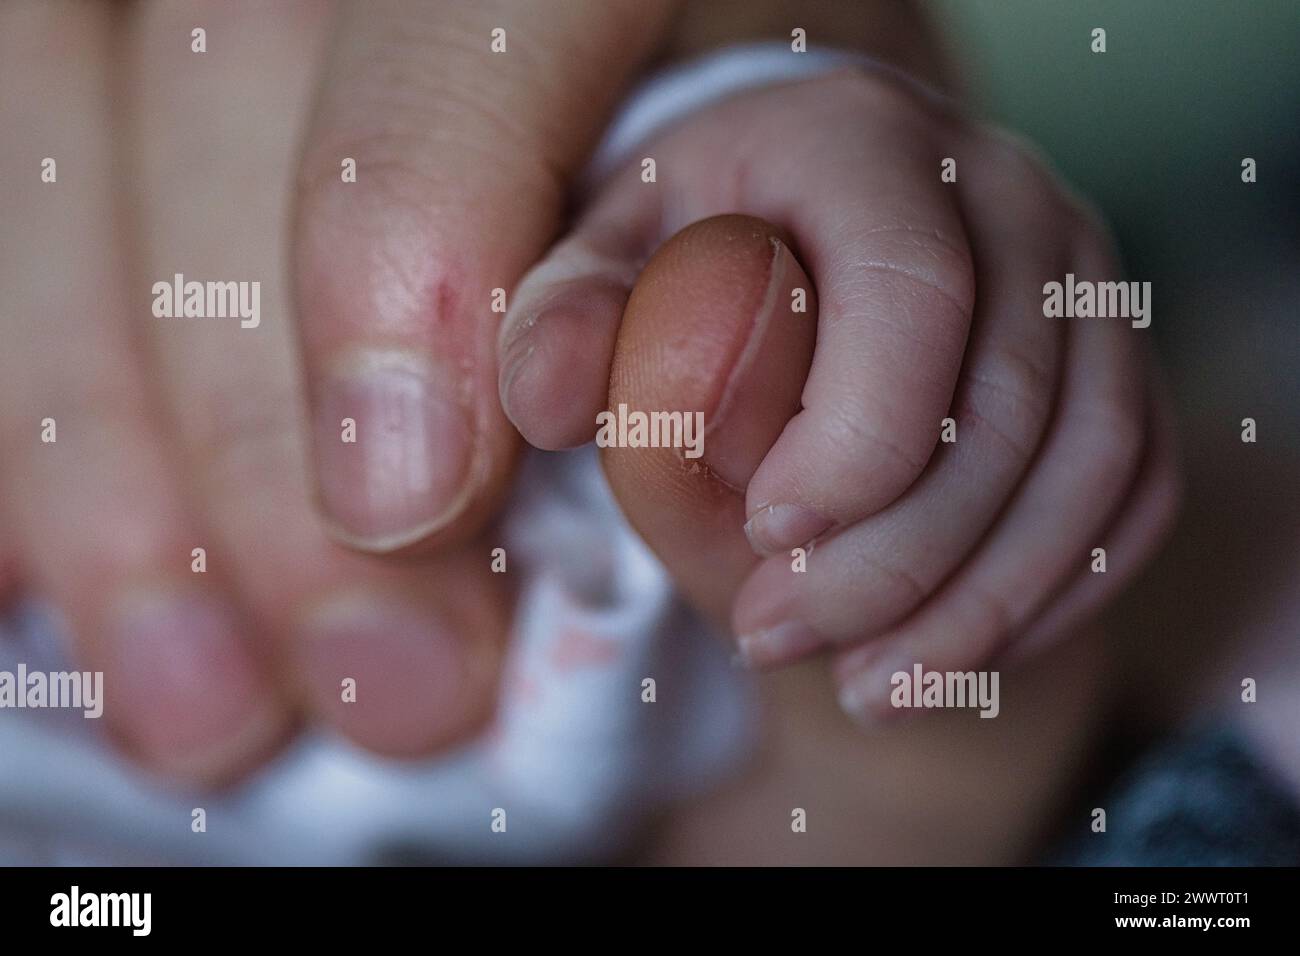 Close-up of a newborn's tiny hand gripping an adult's finger, symbolizing care and parental love. Stock Photo